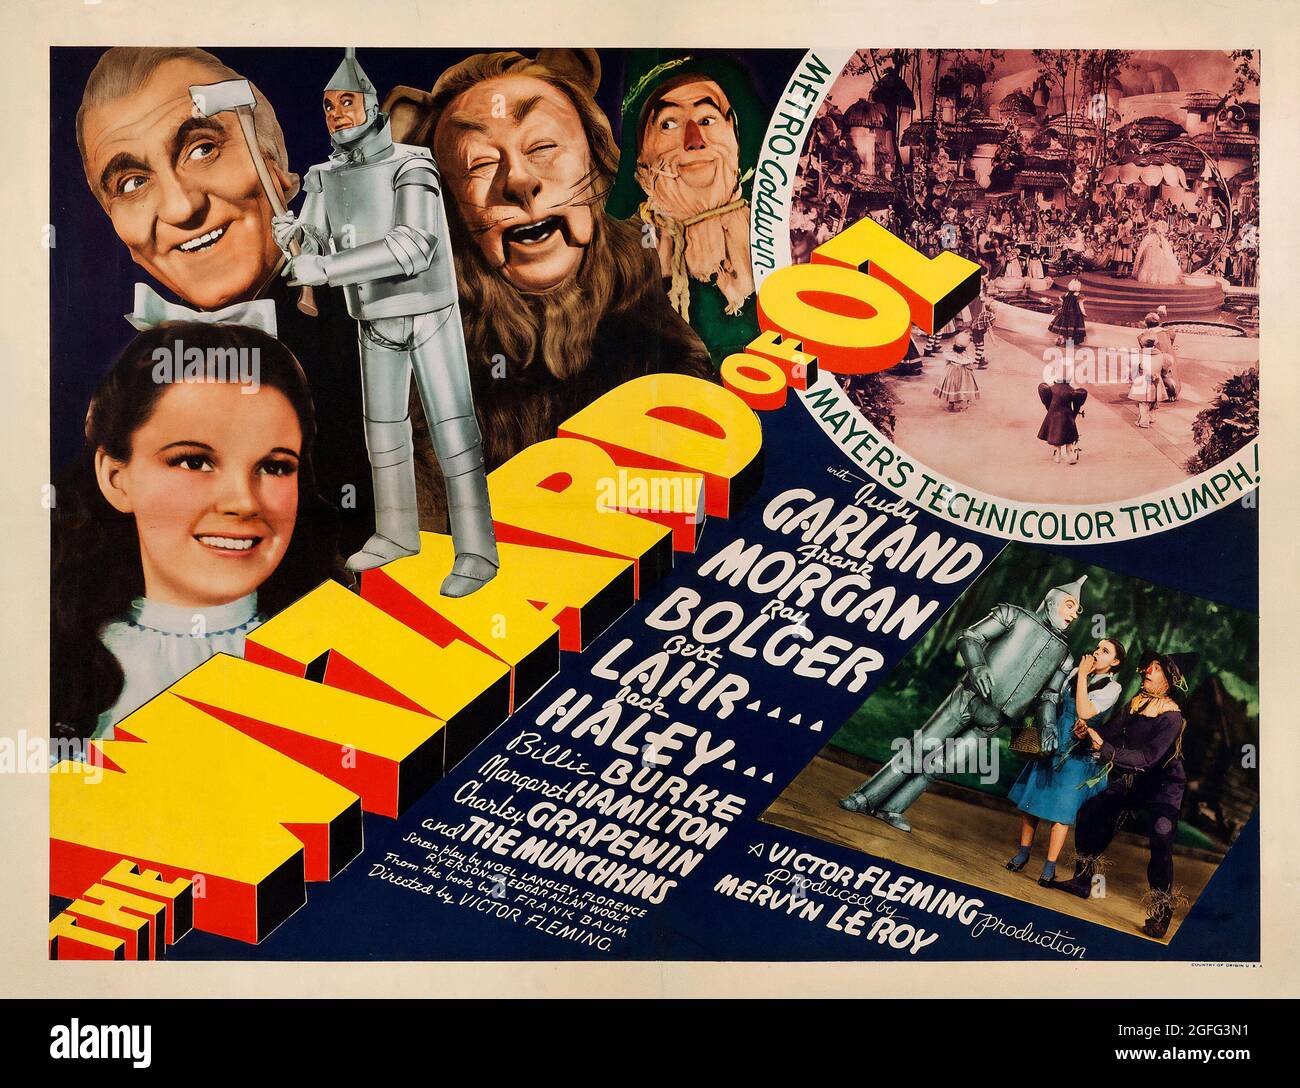 Movie poster: The Wizard of Oz is a 1939 American musical fantasy film starring Judy Garland, Frank Morgan, Ray Bolger and Bert Lahr. Stock Photo